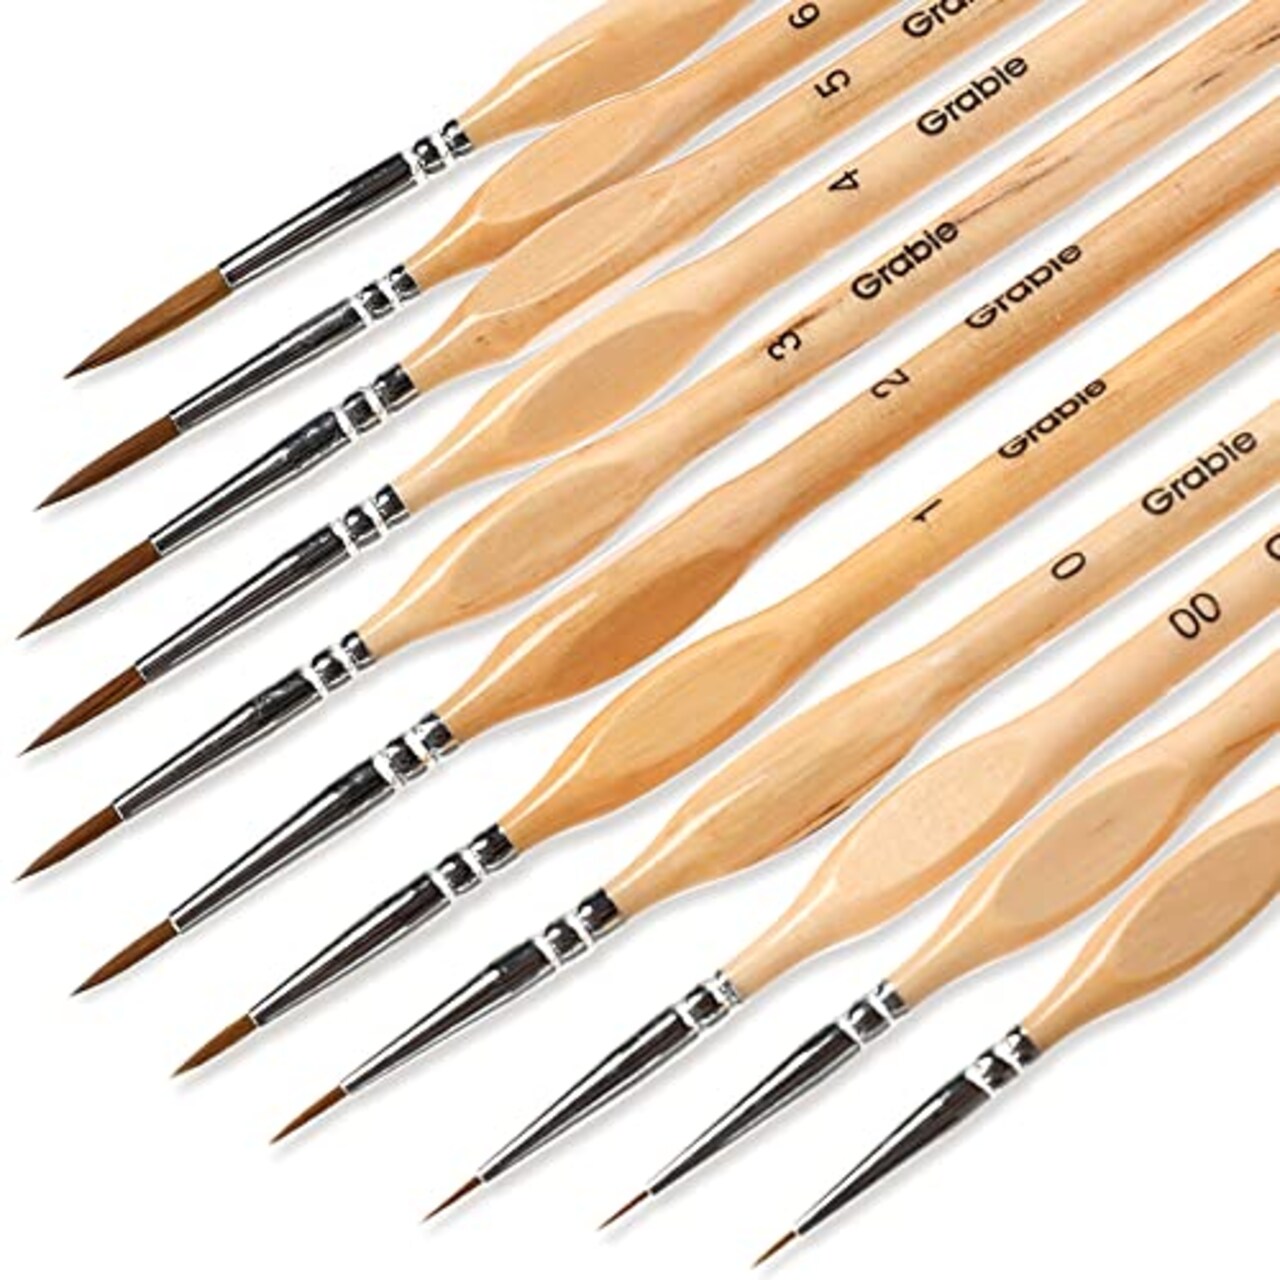 Grabie Paint Brush Set, Miniature Detail, 11 Pcs for Oil, Acrylic,  Watercolor and Gouache, Nylon Hair Paint Brush With Natural Wood Handle,  Great for Beginners and Professionals